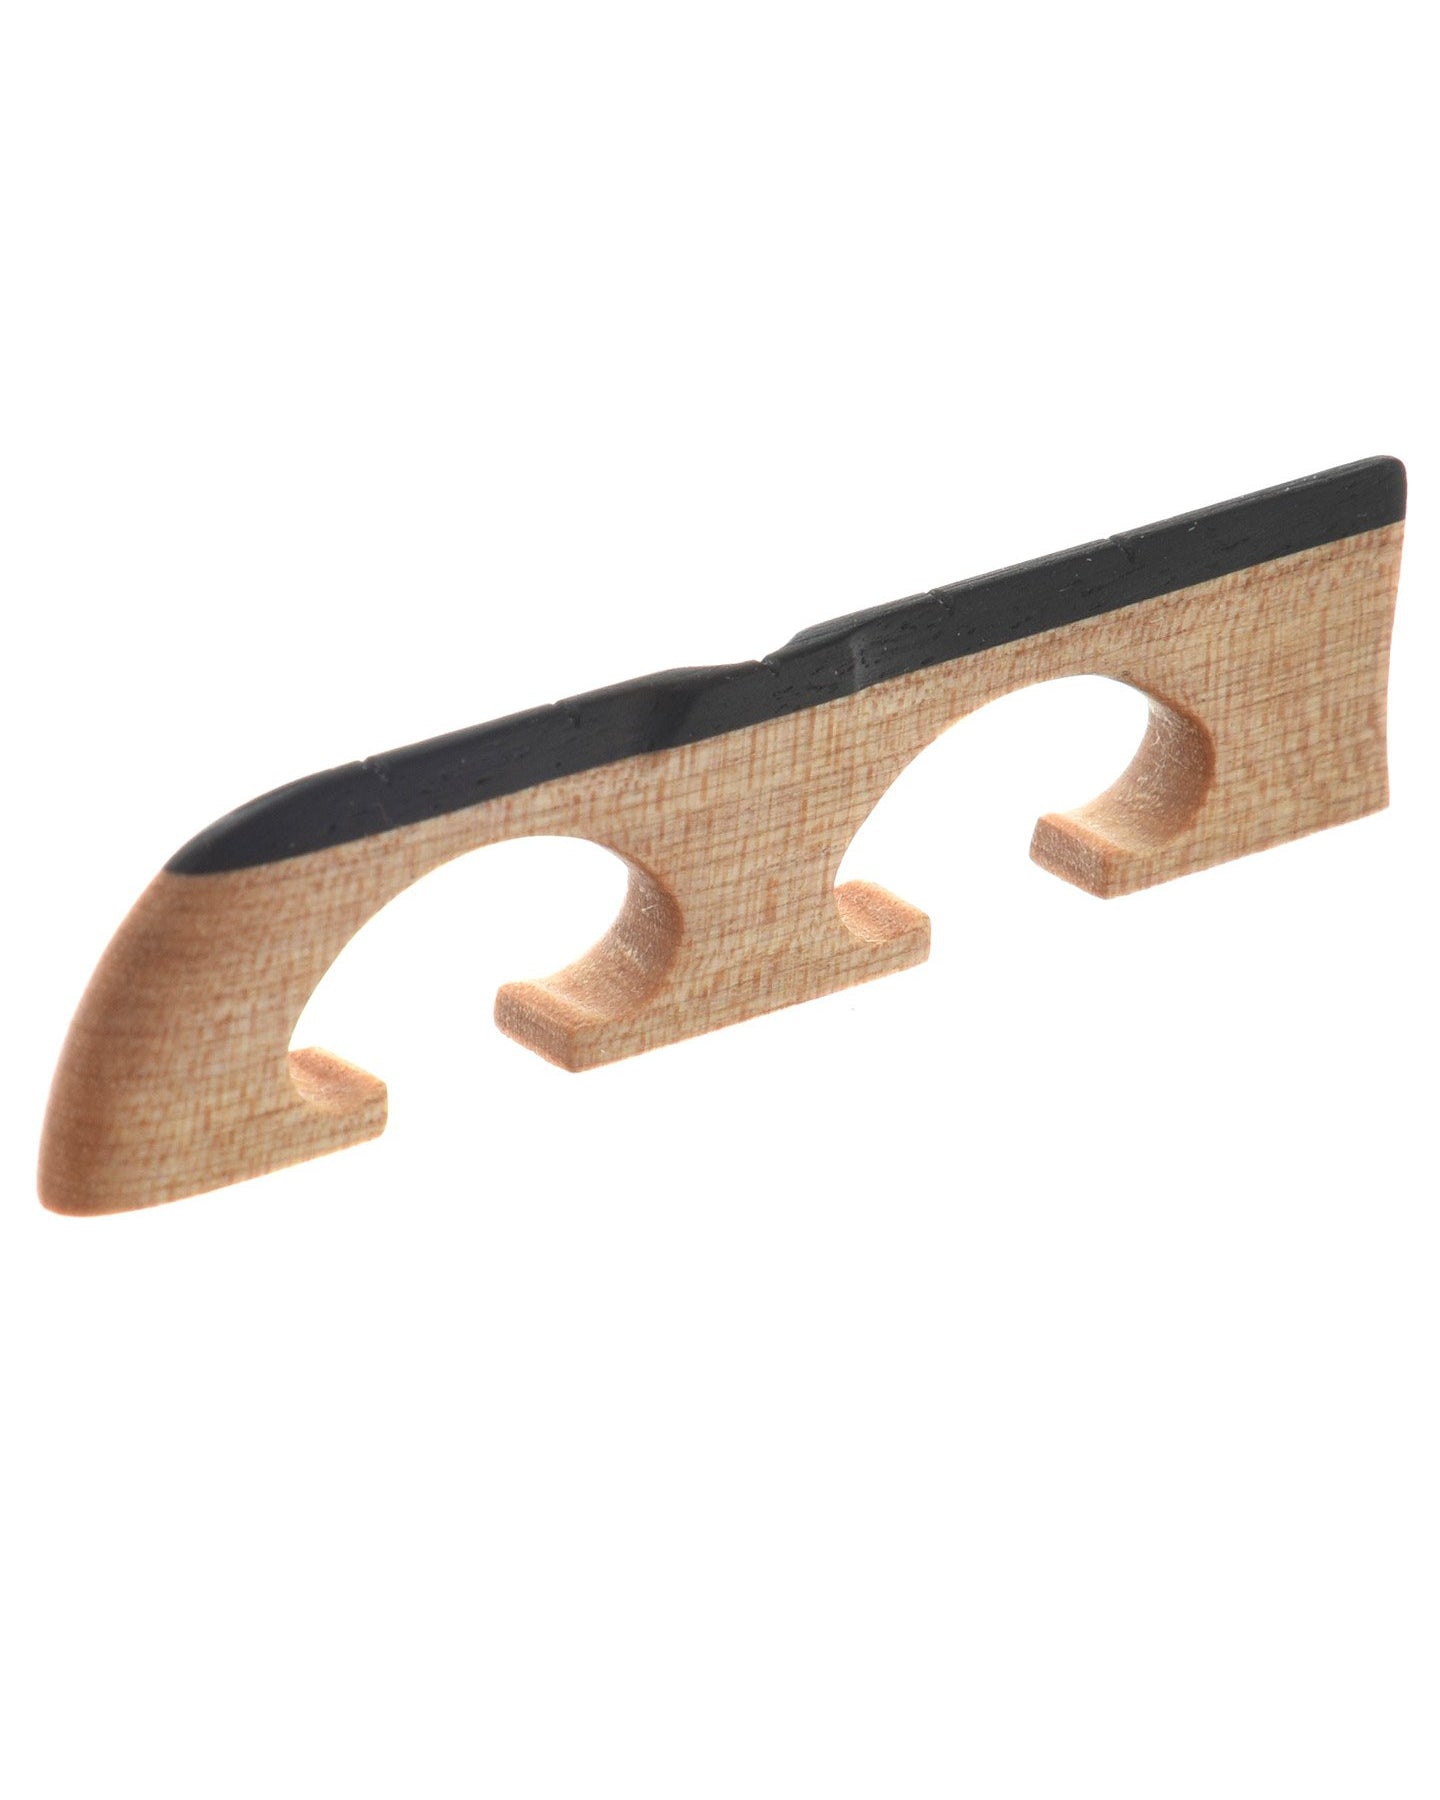 Image 1 of SAMPSON "OLD GROWTH" BANJO BRIDGE, 11/16" BIRCH STANDARD-SPACED Handcrafted in Wisconsin from ol - SKU# SBBOG11-BIRCH : Product Type Accessories & Parts : Elderly Instruments